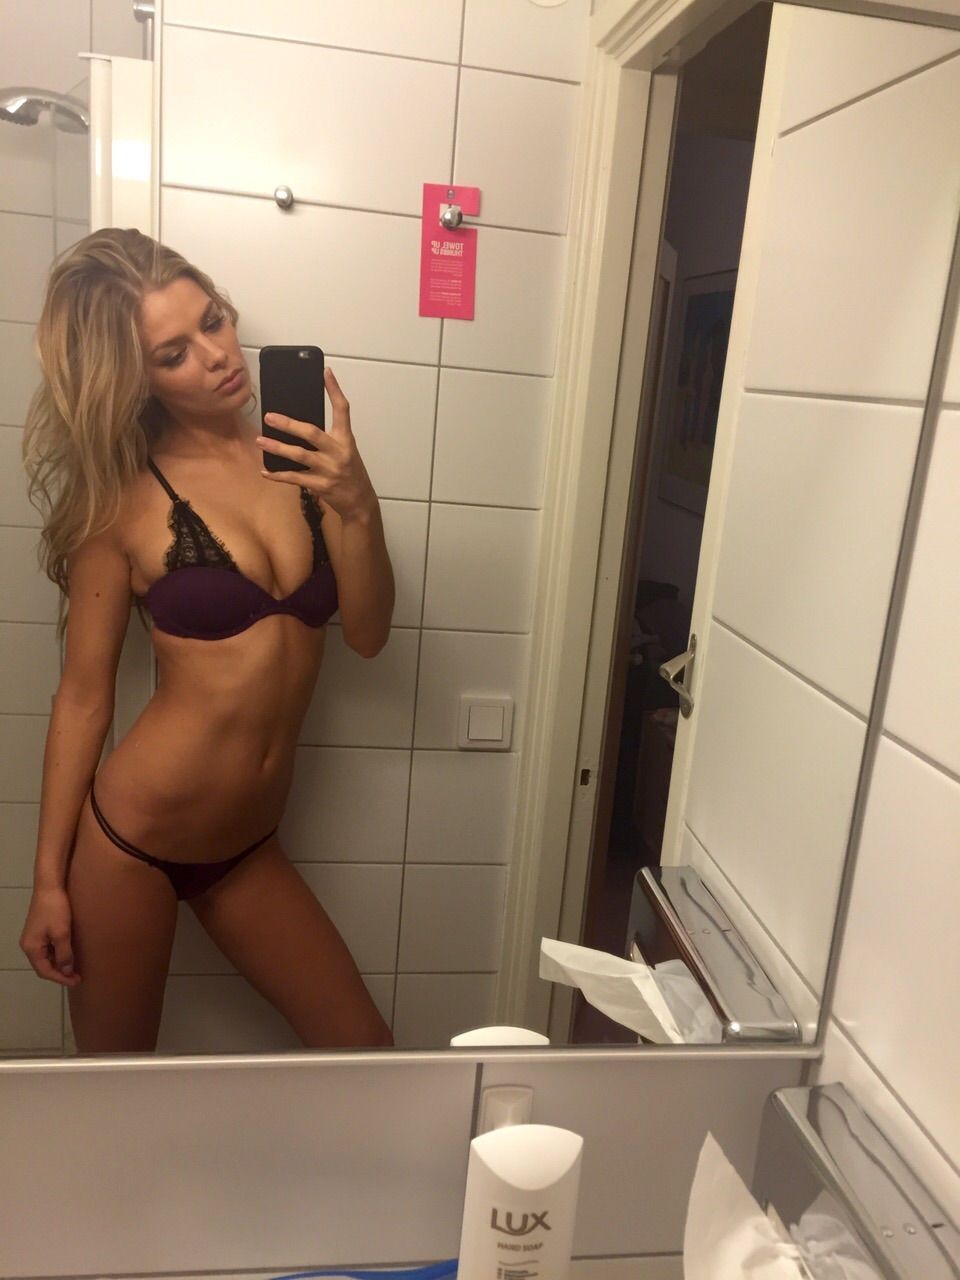 1677773446 215 Danielle Knudson Nude TheFappening 32 - Danielle Knudson Nude Leaked (Over 200 Photos!)